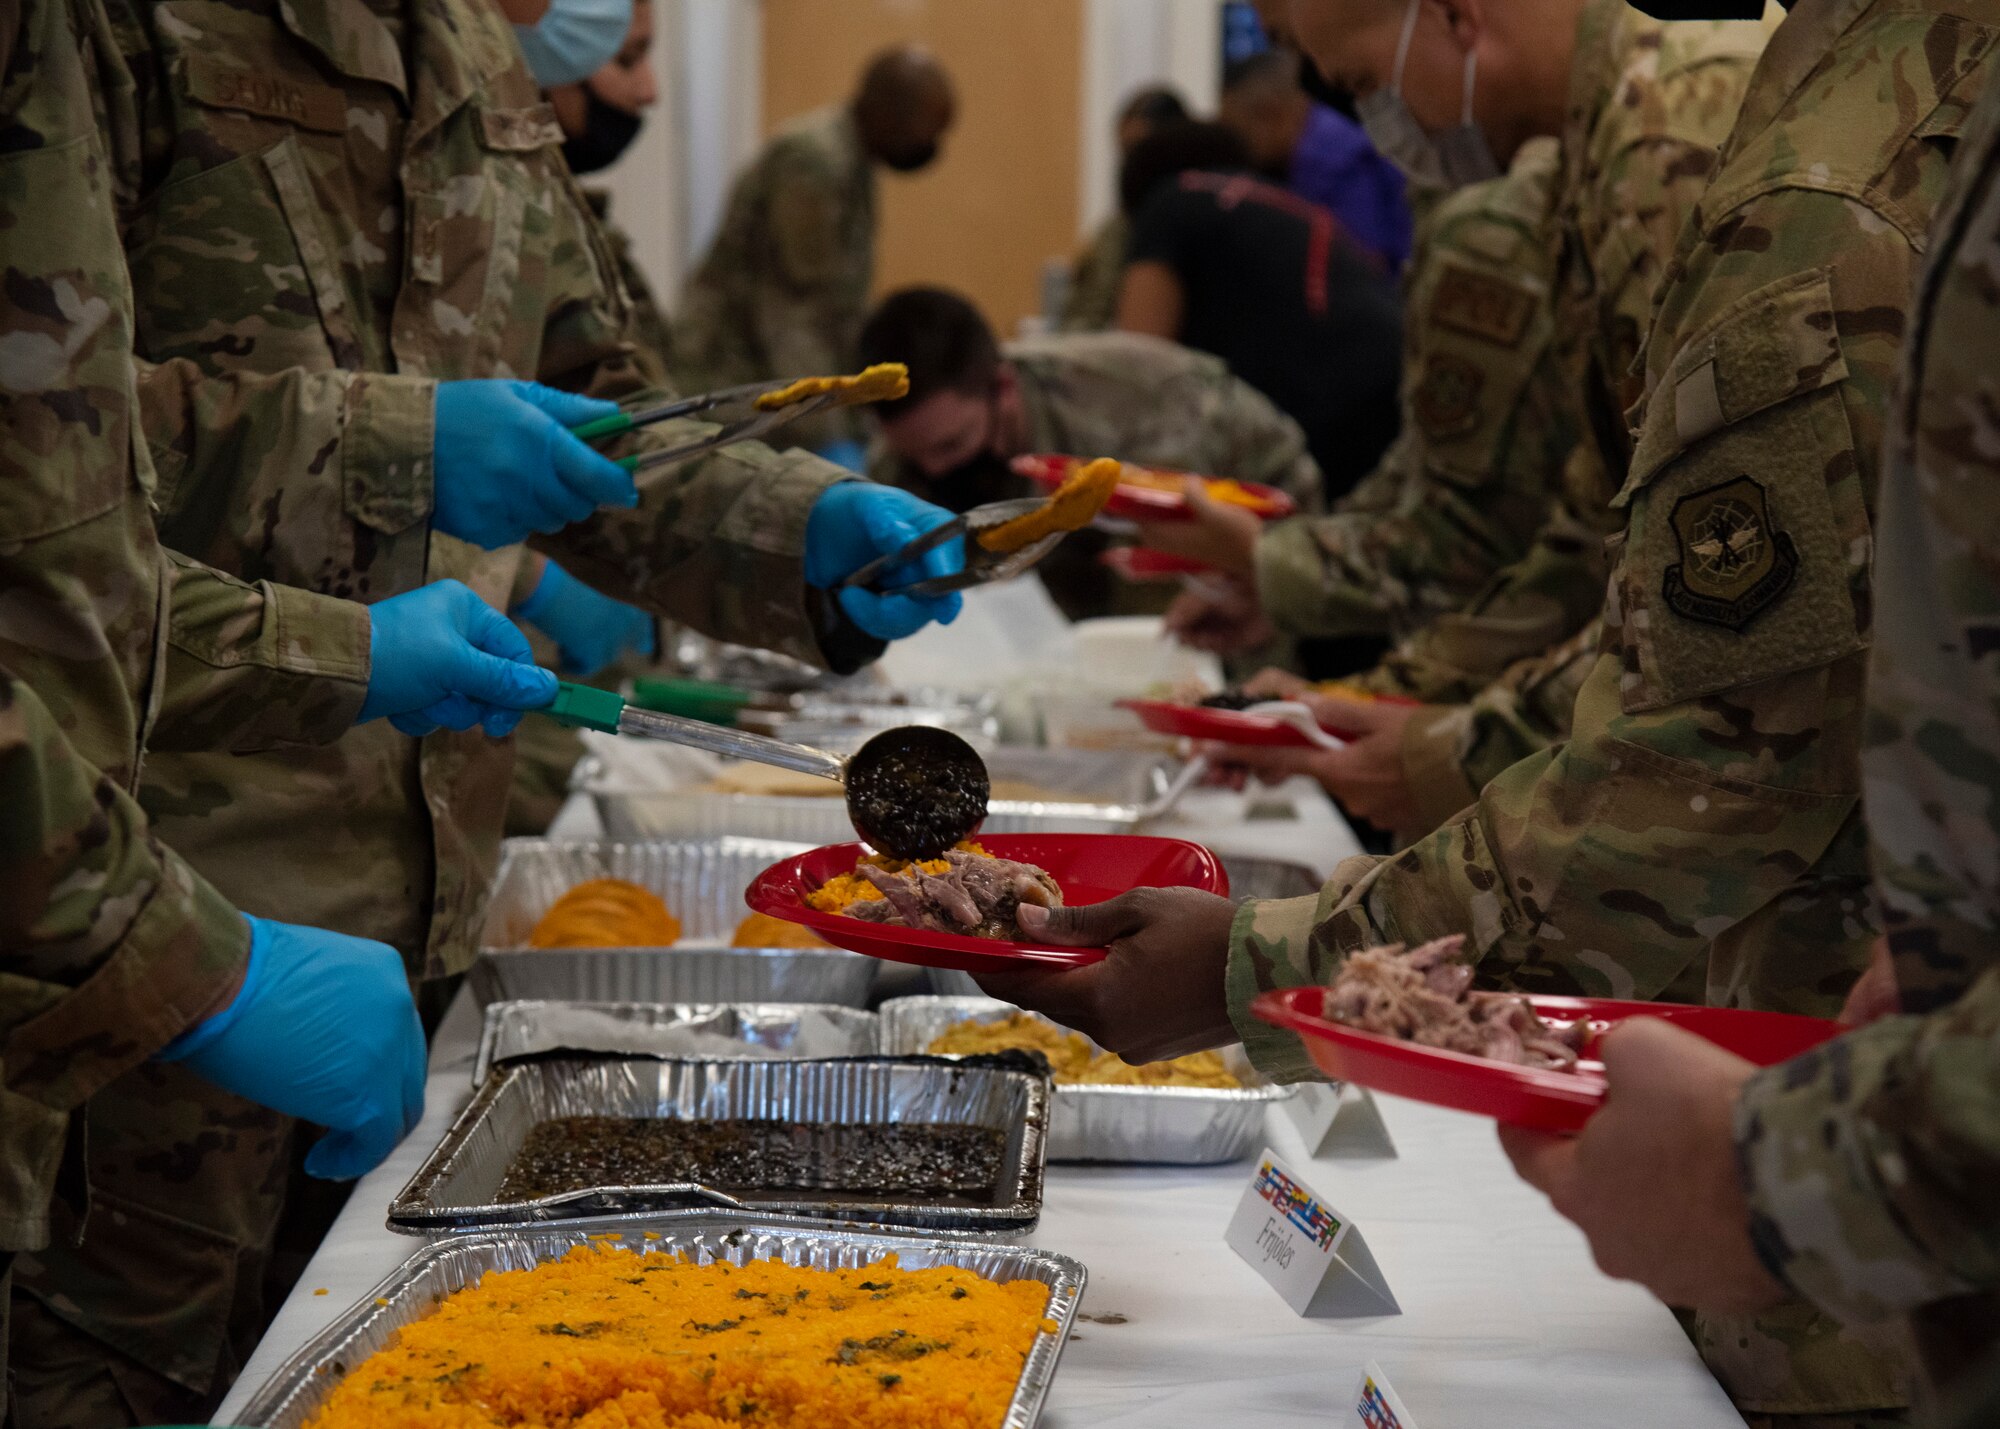 U.S Air Force Airmen serve each other food and refreshments at the Hispanic Heritage Month celebration at MacDill Air Force Base, Florida, Oct. 14, 2021.